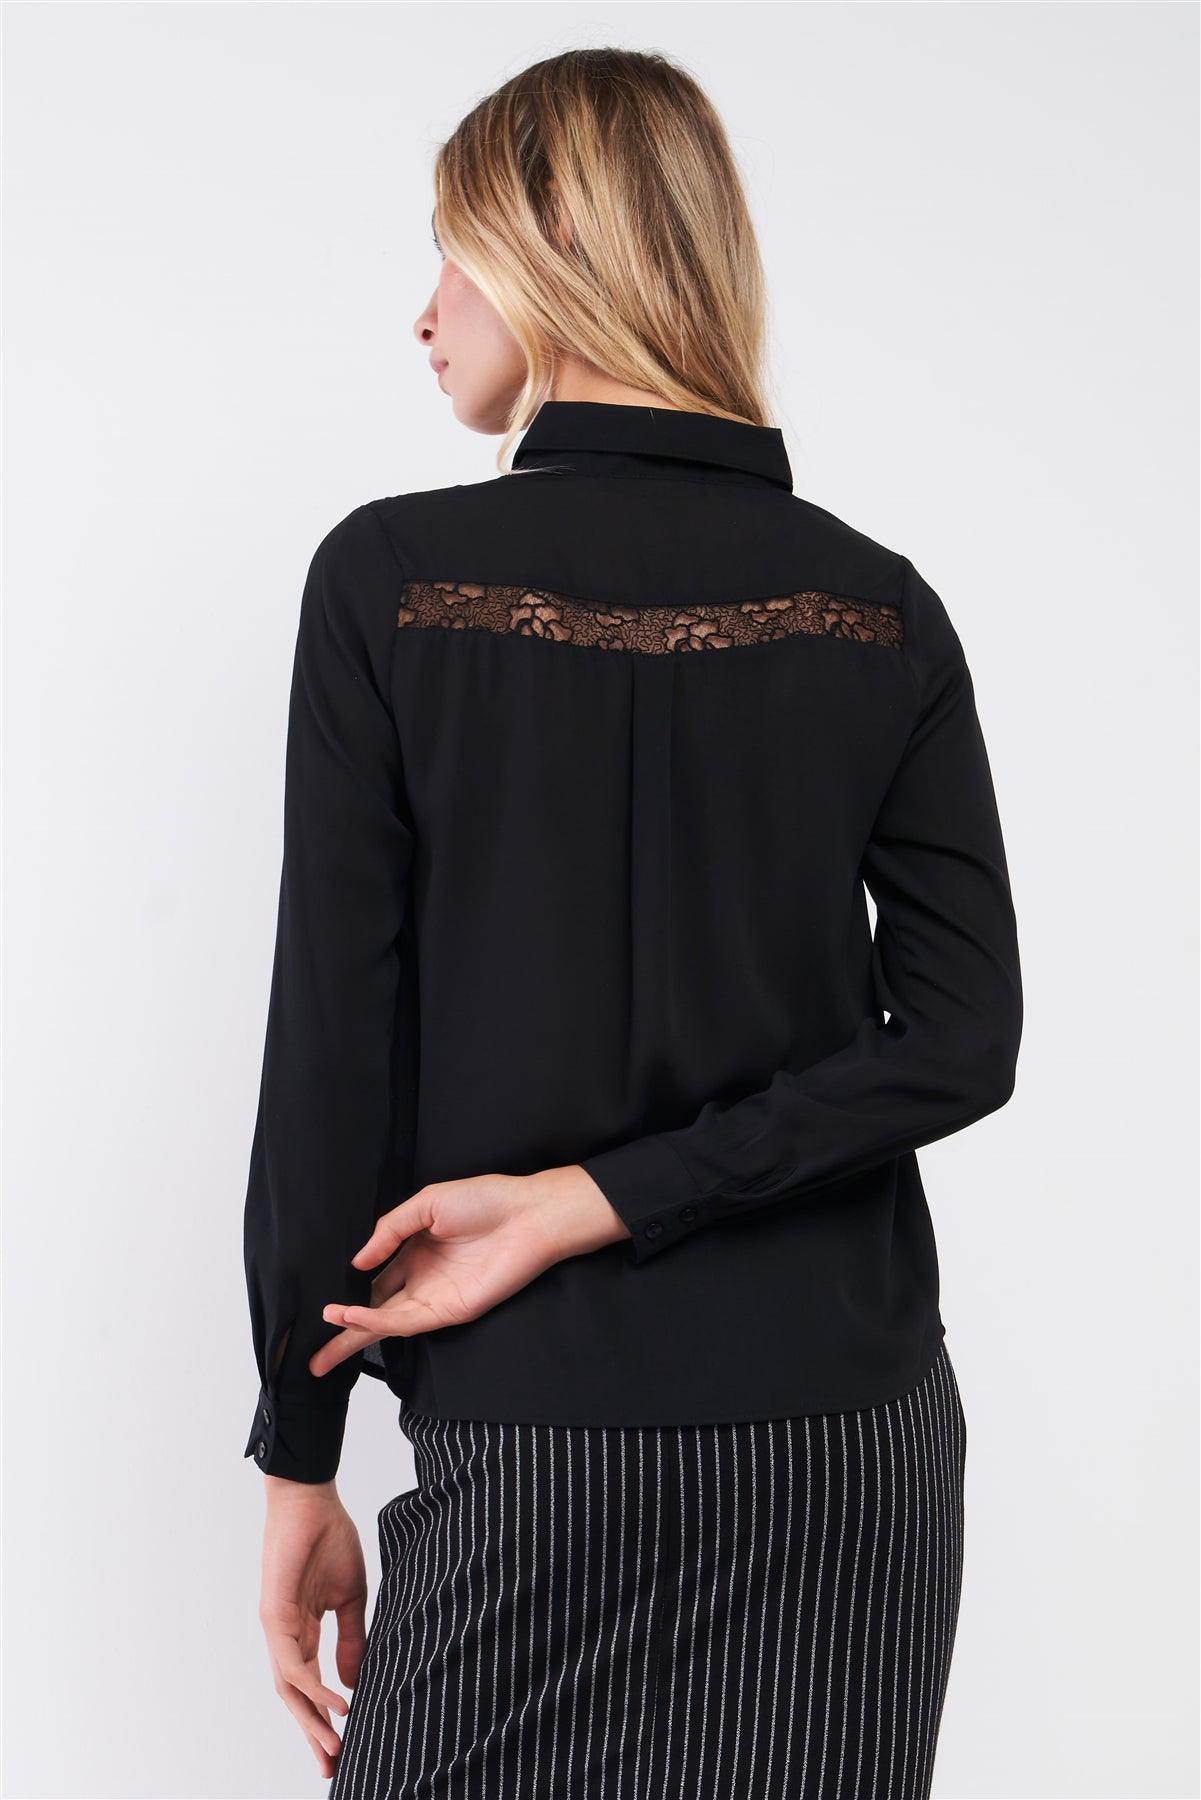 Black Embroidered Sheer Mesh Insert Detail Classic Collar Button-Down Front Shirt Top